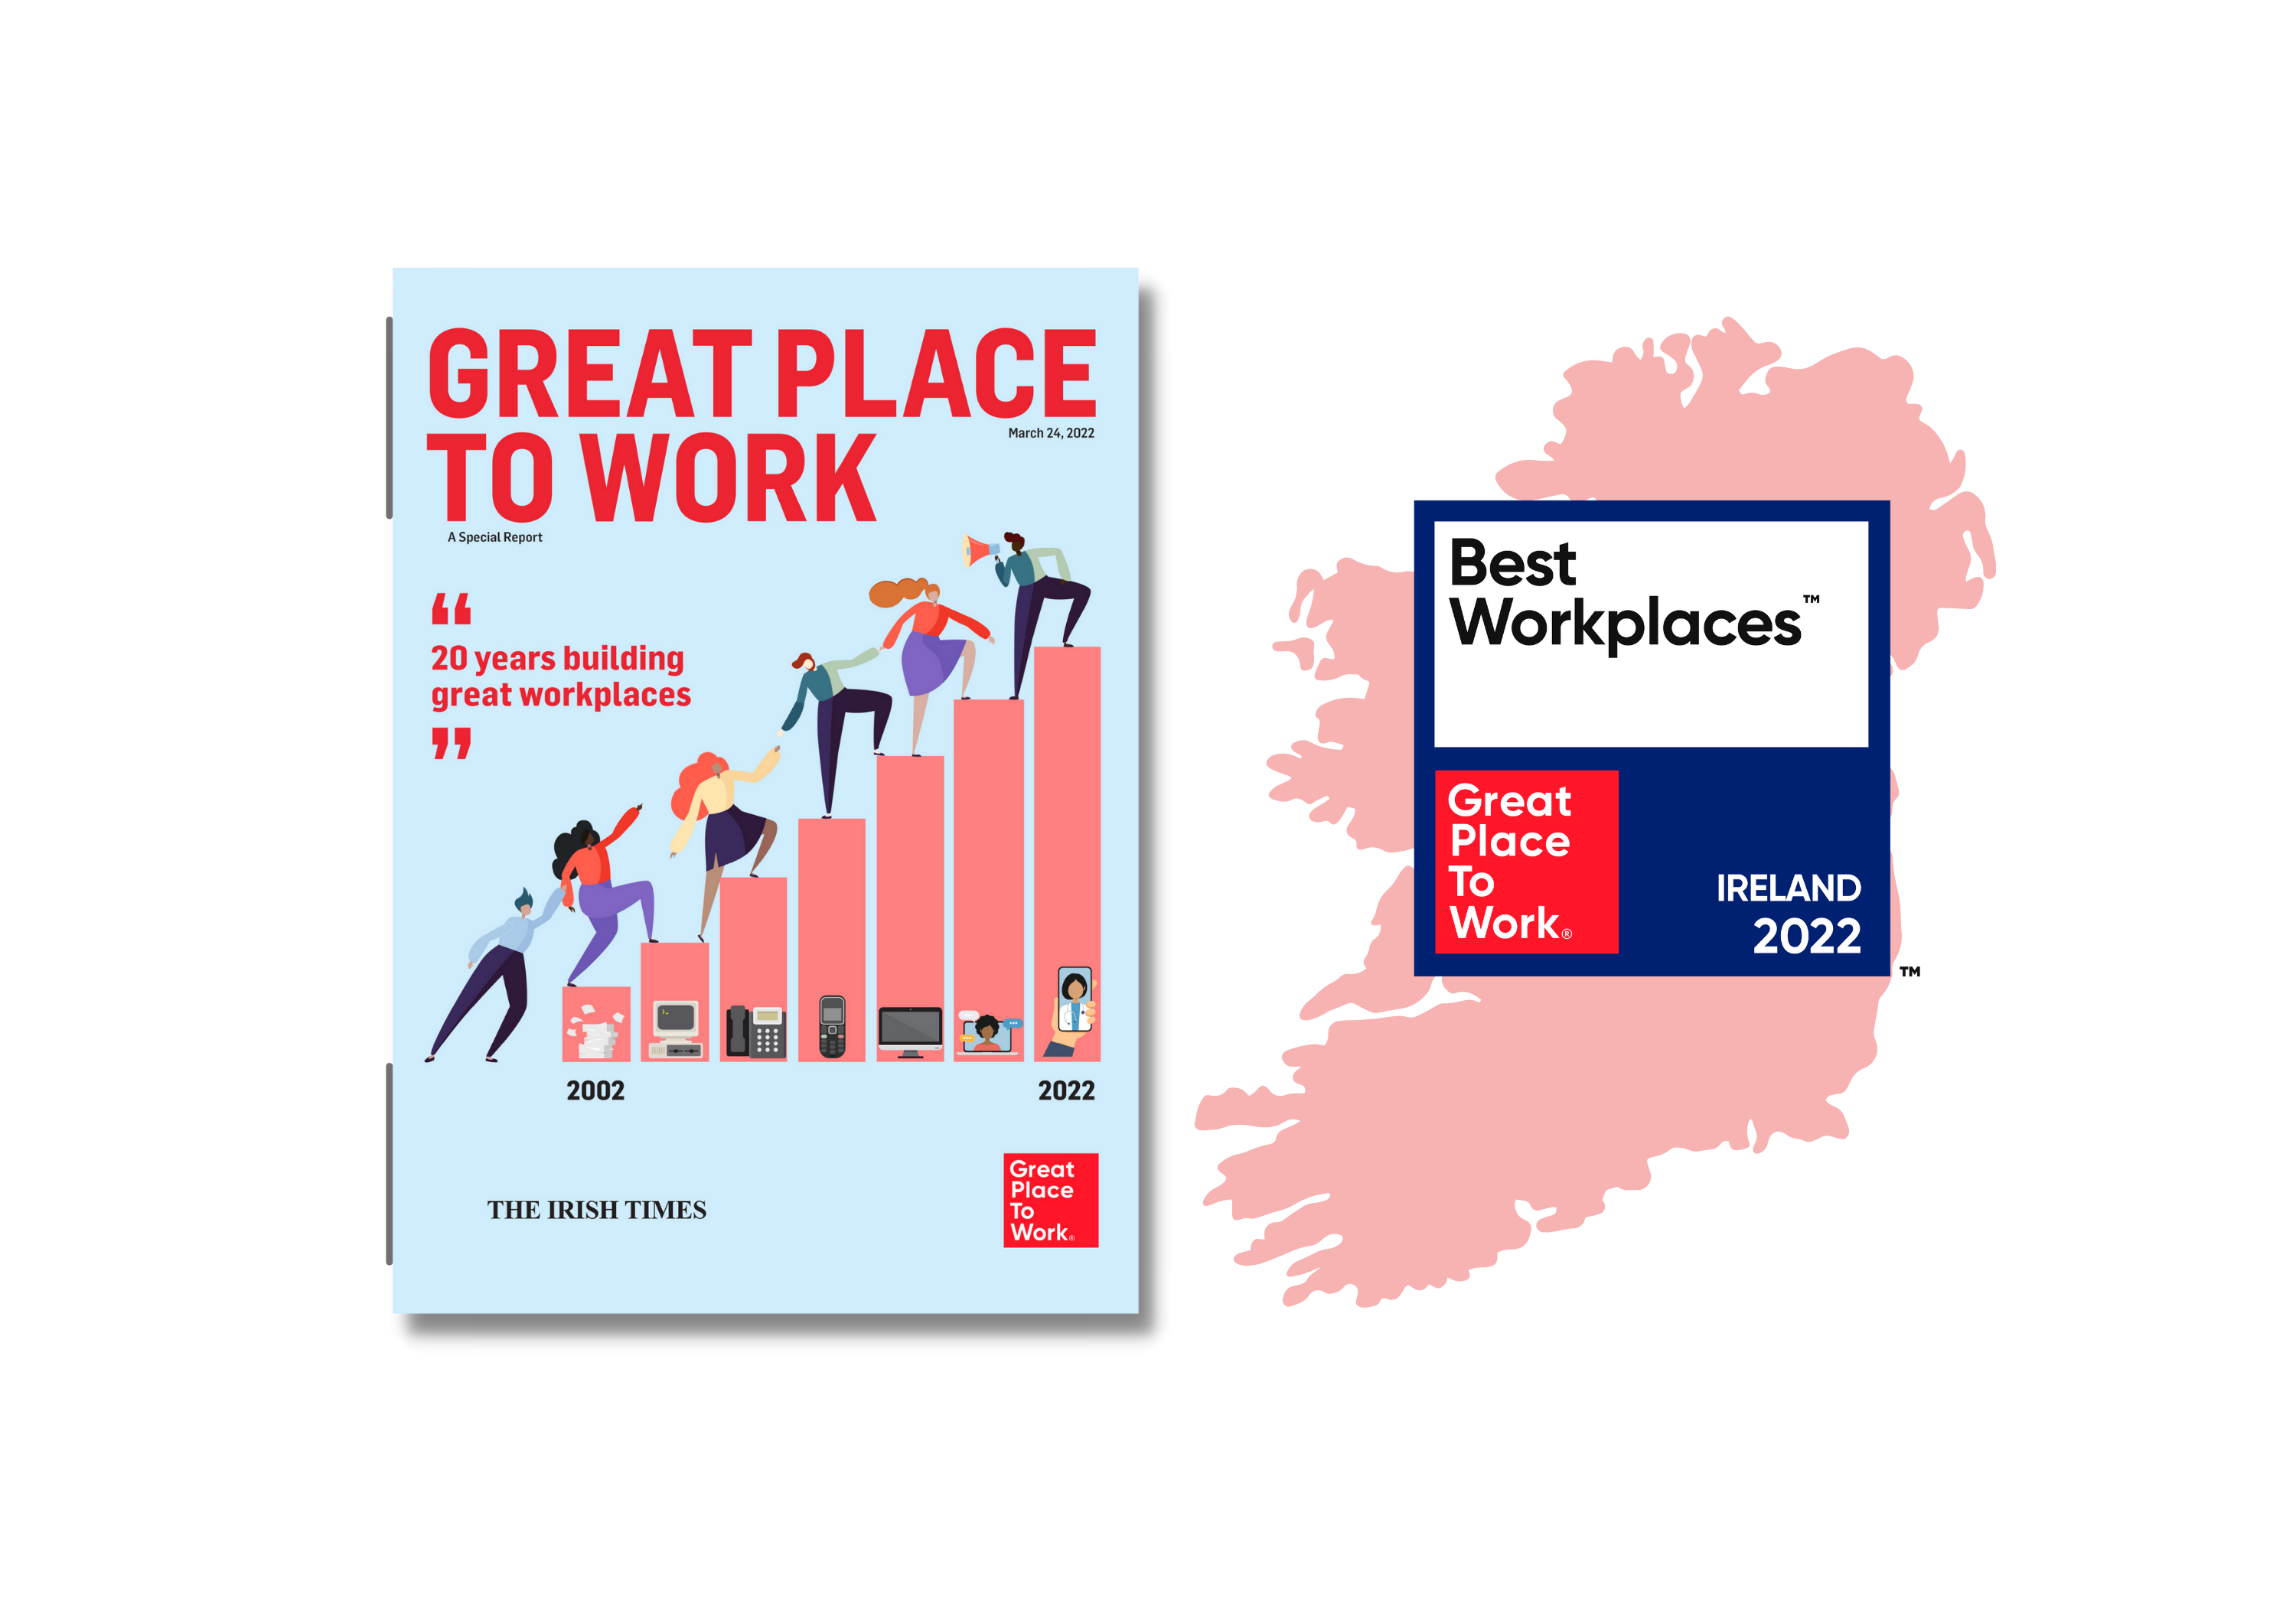 Ireland's Best Workplaces 2022 are revealed!